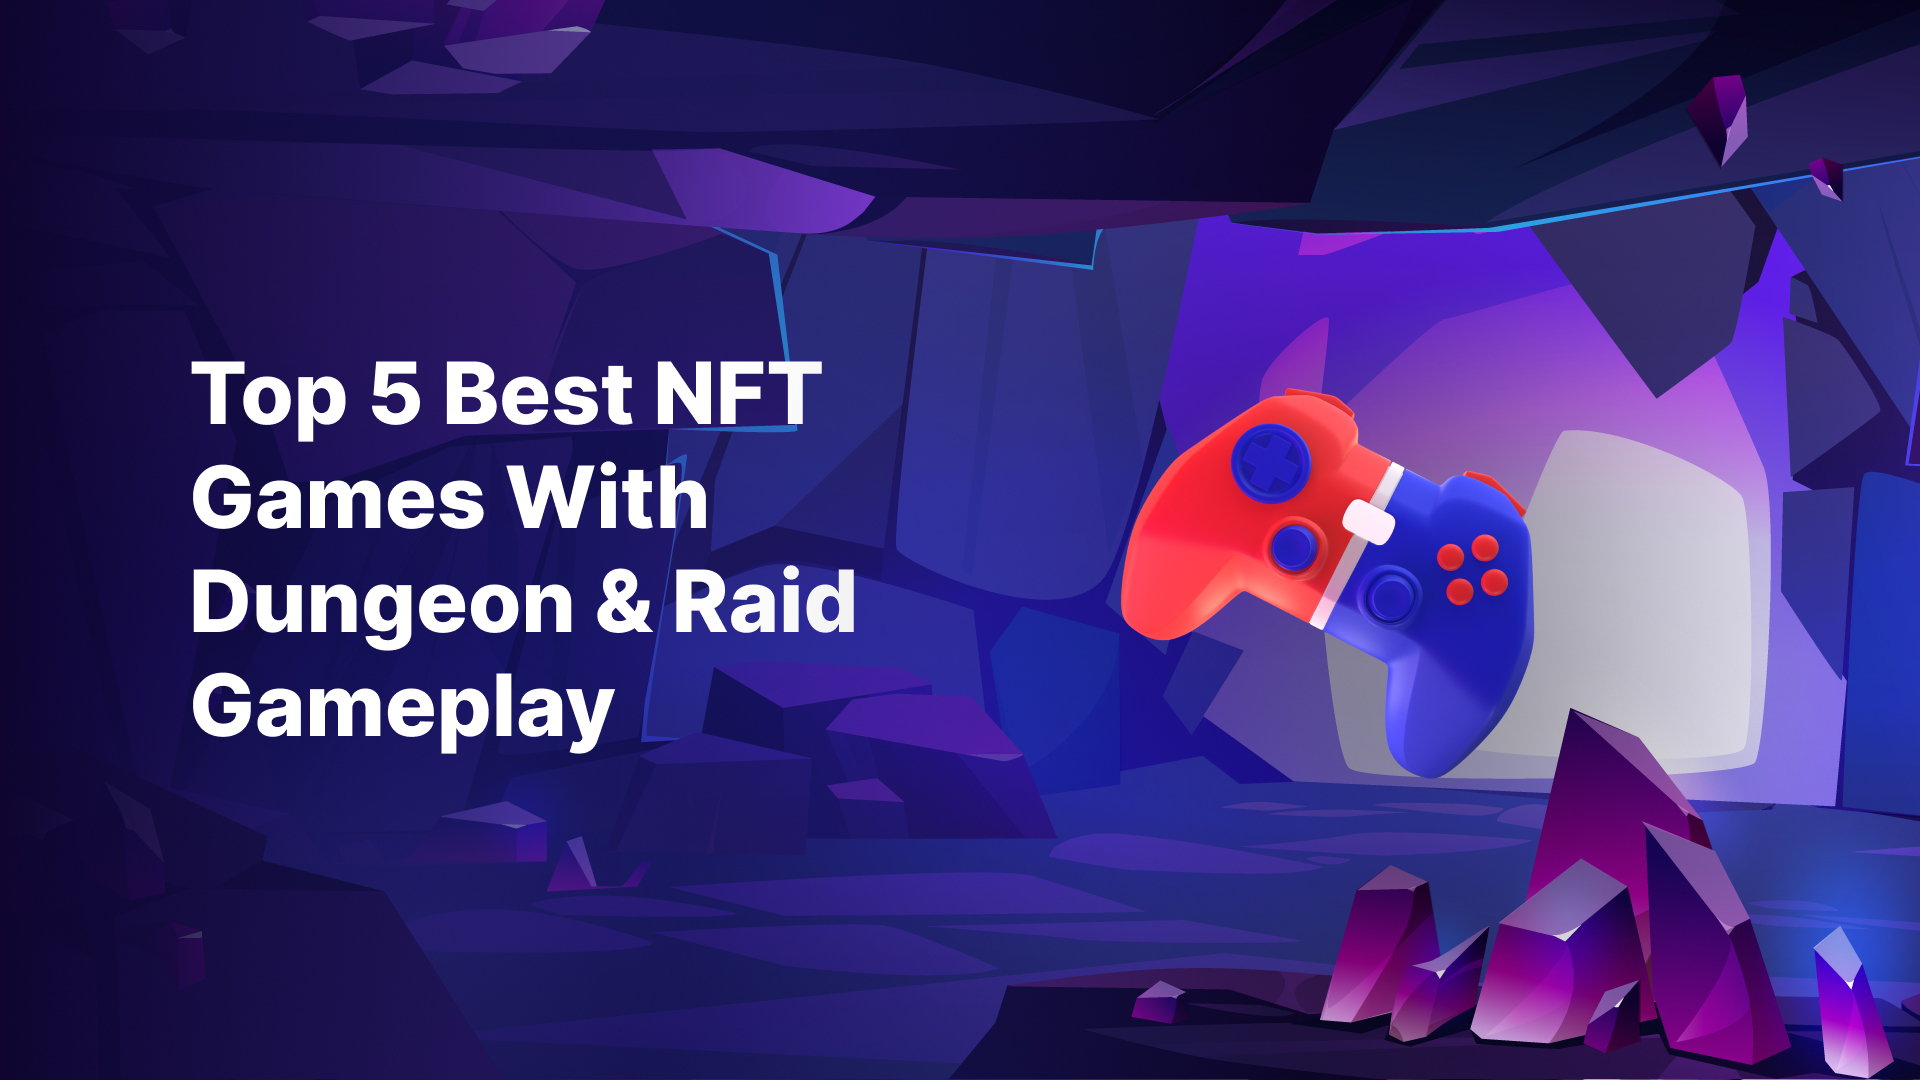 Top 5 Best NFT Games With Dungeon & Raid Gameplay